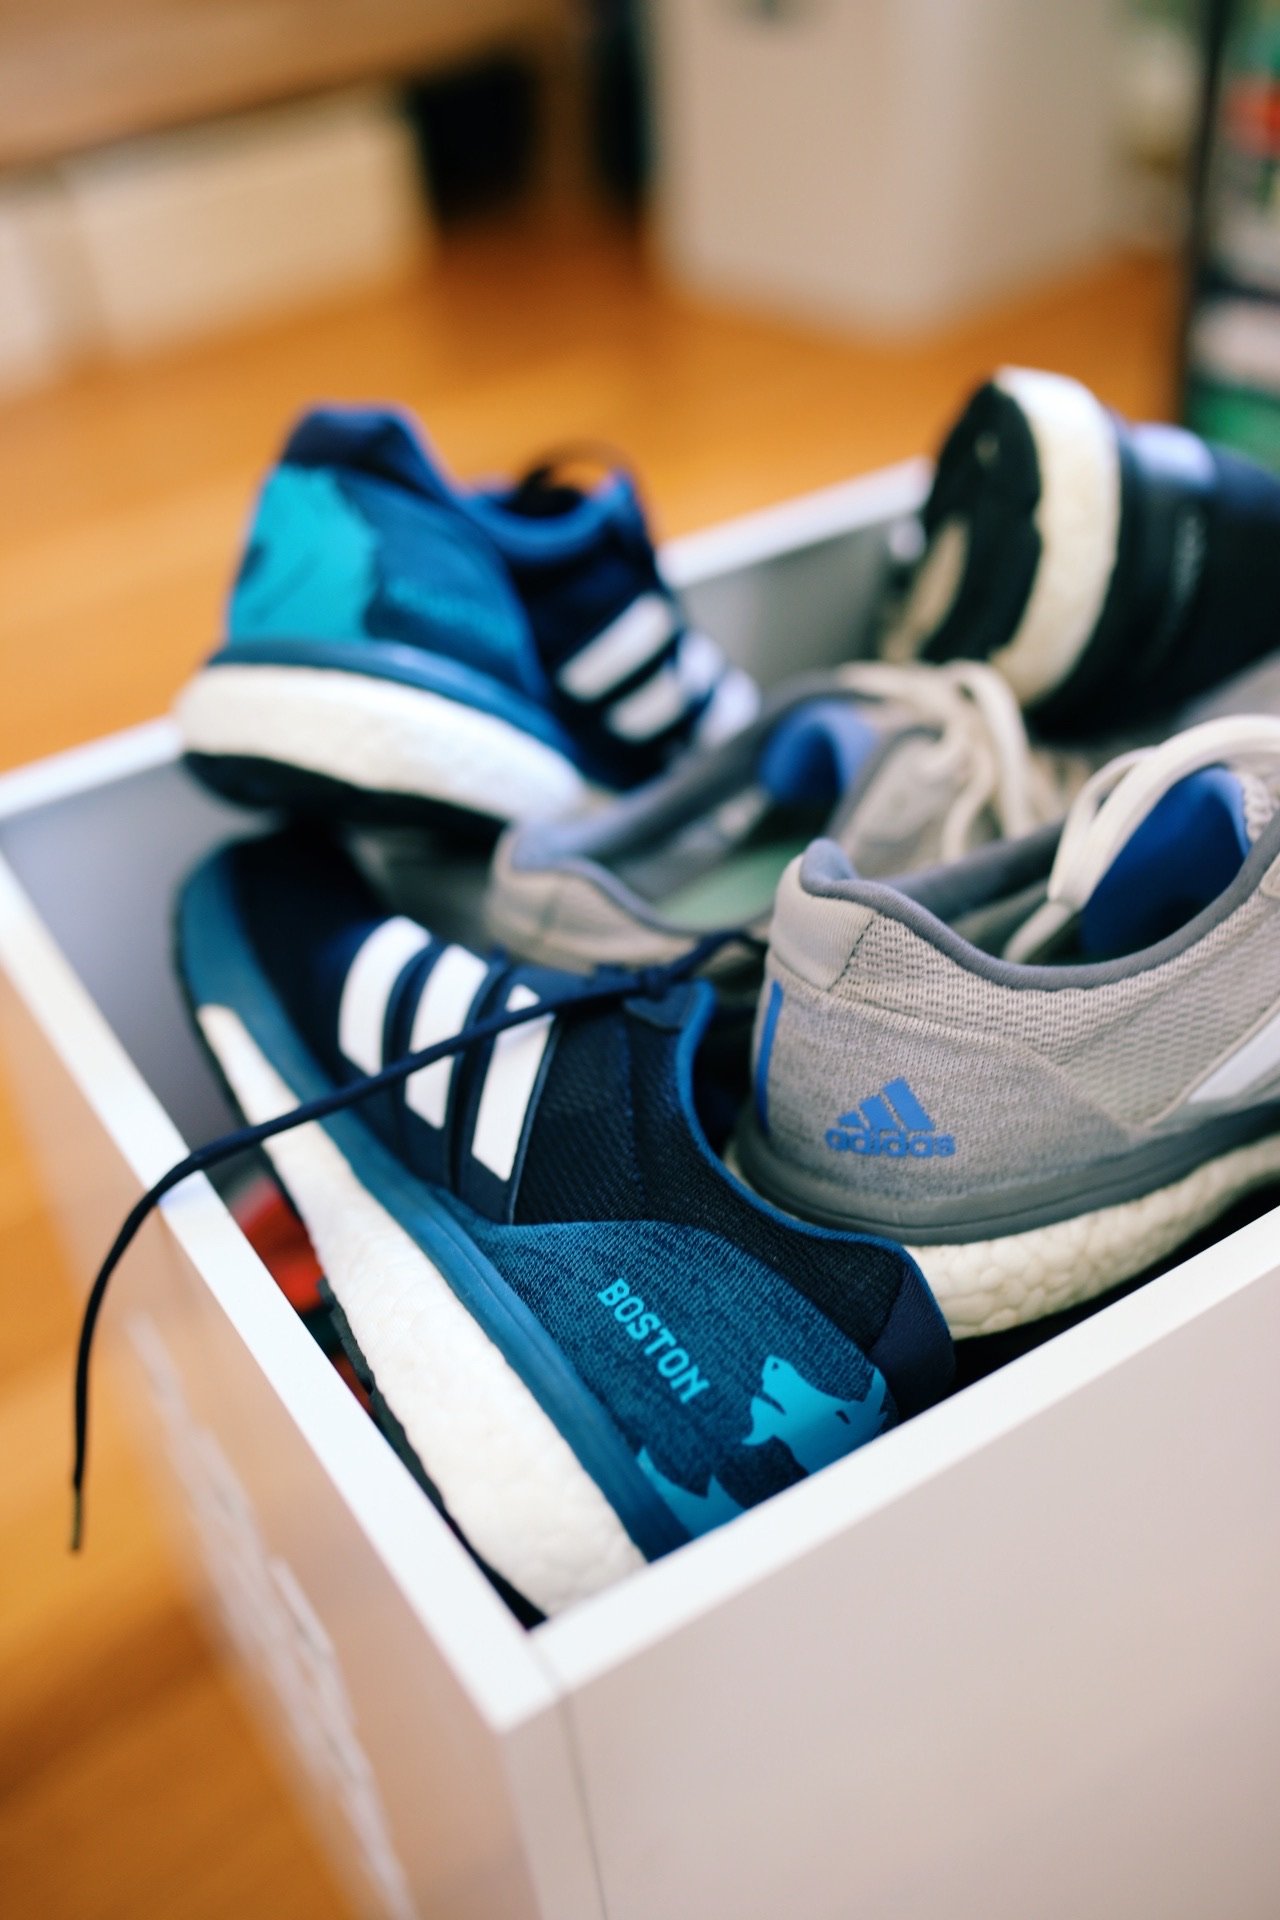 Running shoes in box